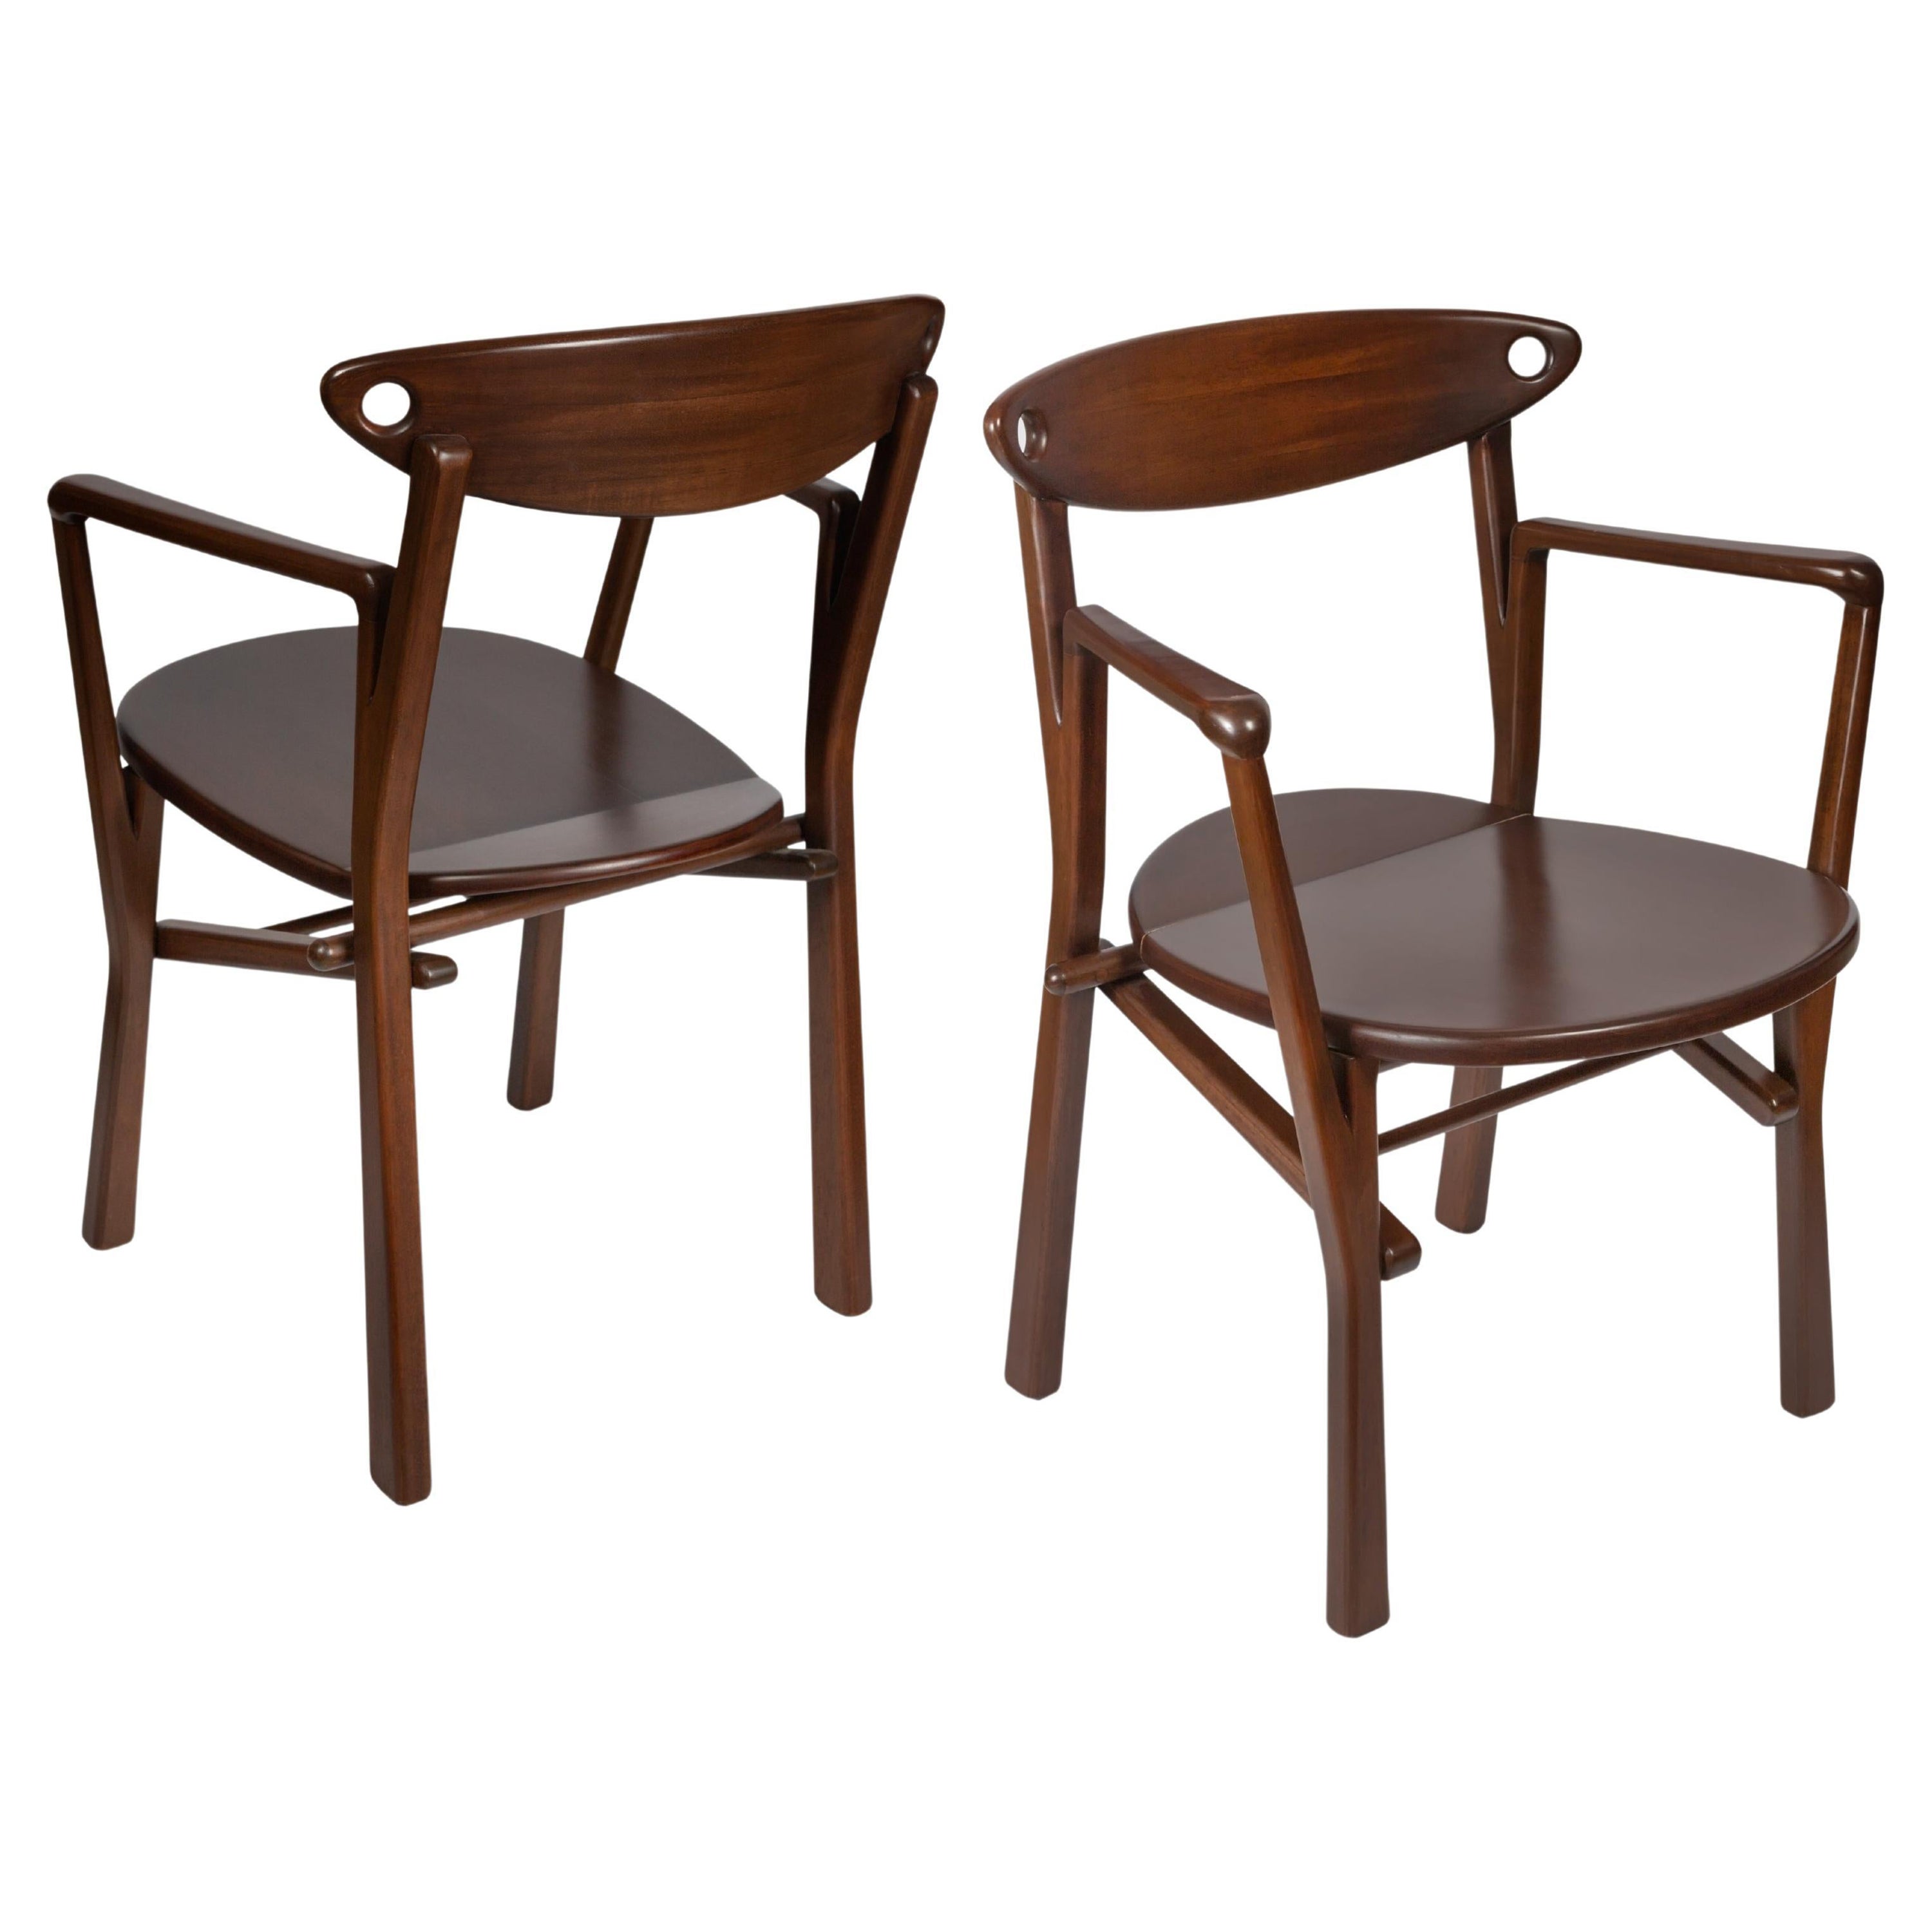 Set of 02 Armchairs Laje in Dark Brown Finish Wood